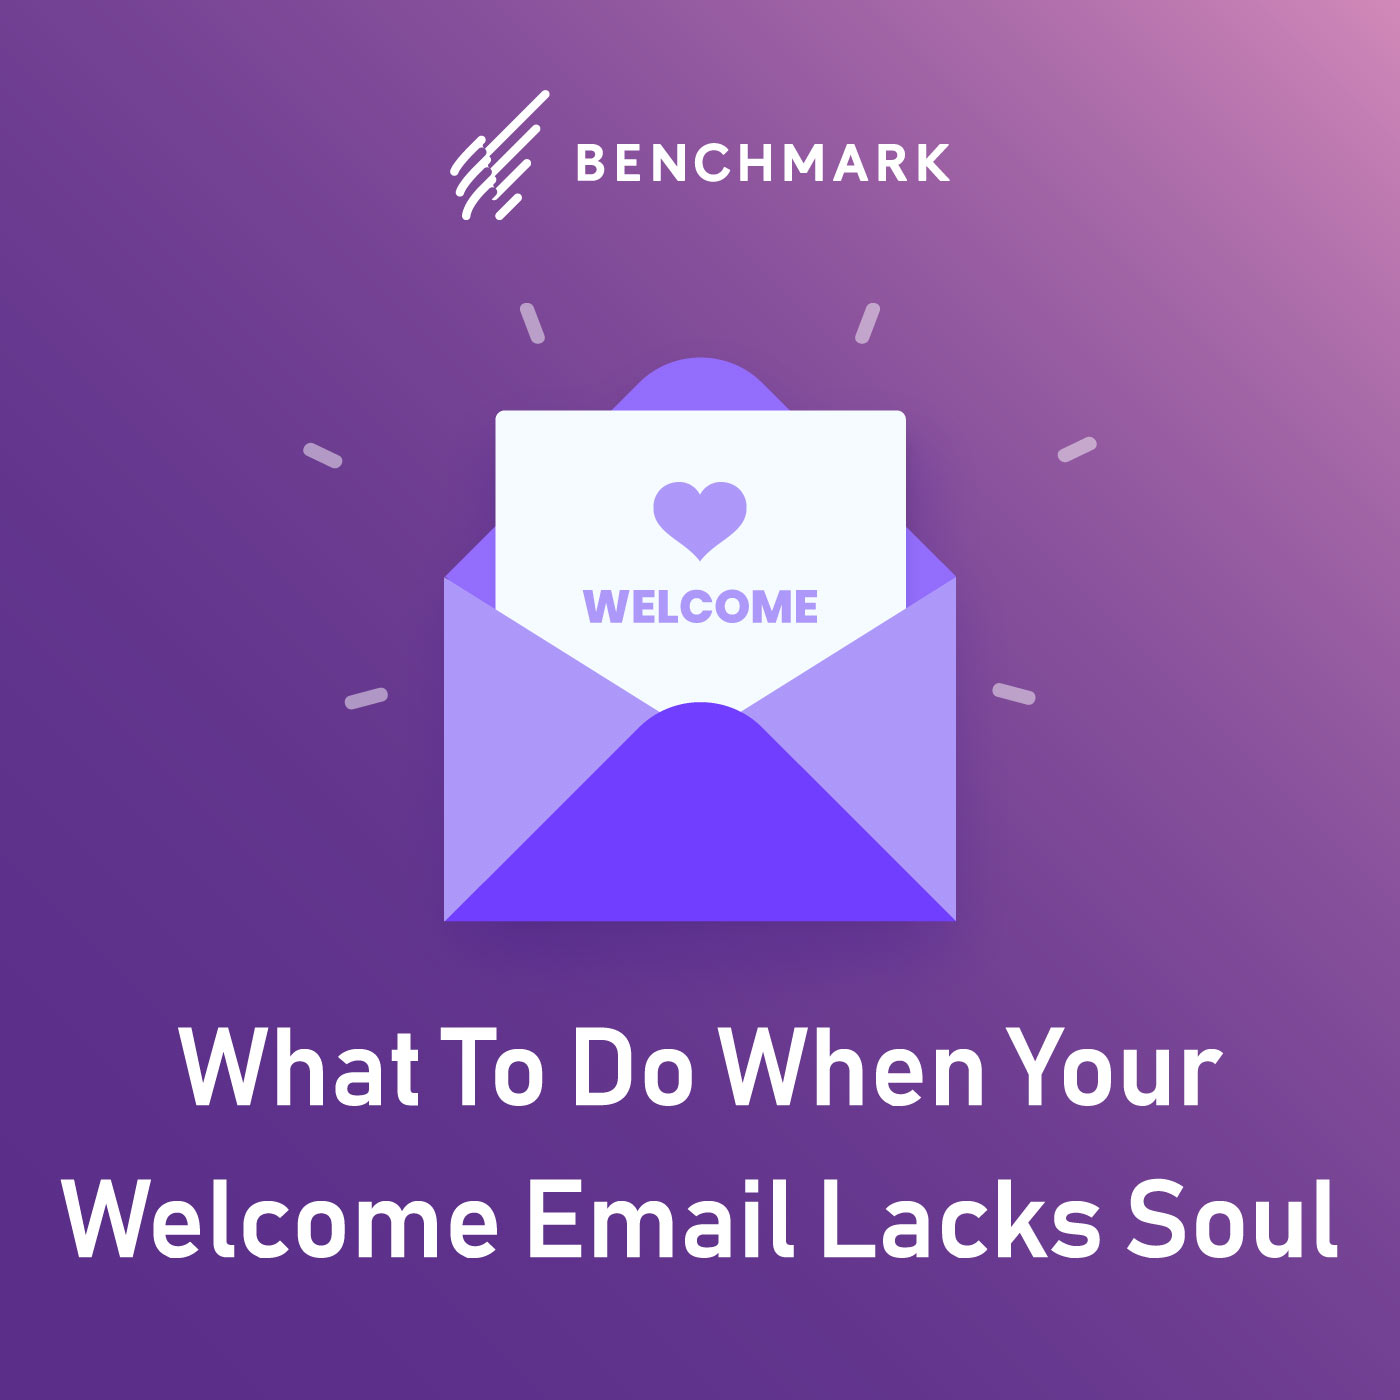 What To Do When Your Welcome Email Lacks Soul